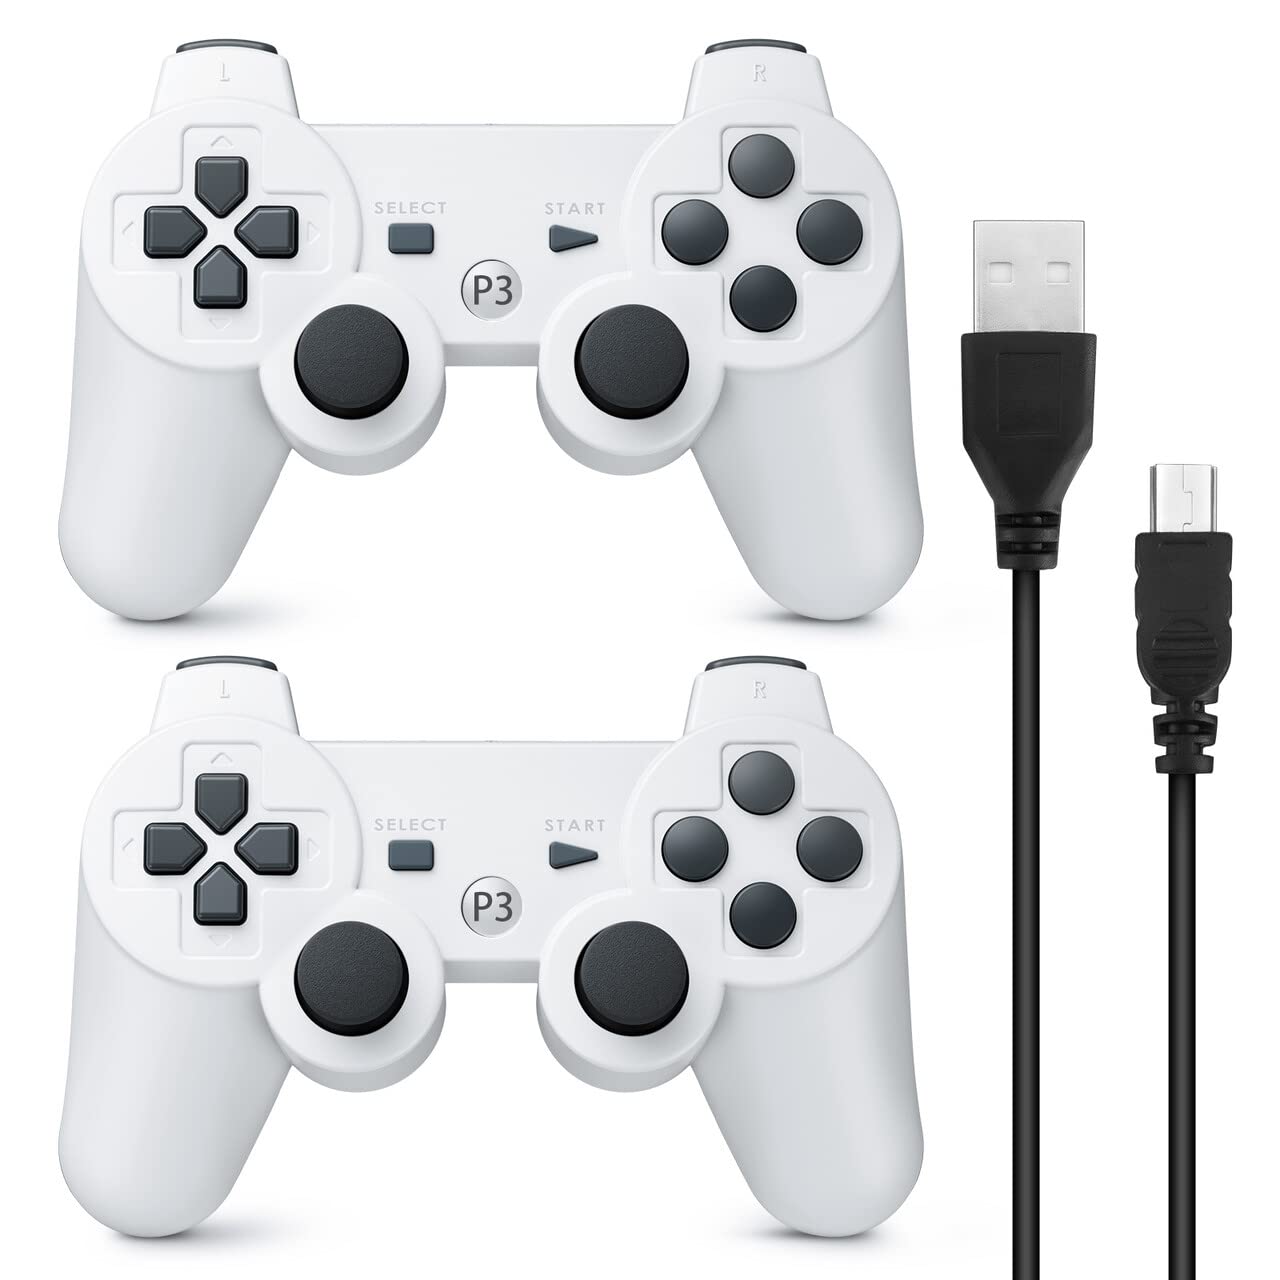 Powerextra PS-3 Wireless Controller Compatible with Play-Station 3, 2 Pack High Performance Gaming Controller with Upgraded Joystick Double Shock for Play-Station 3 (White)